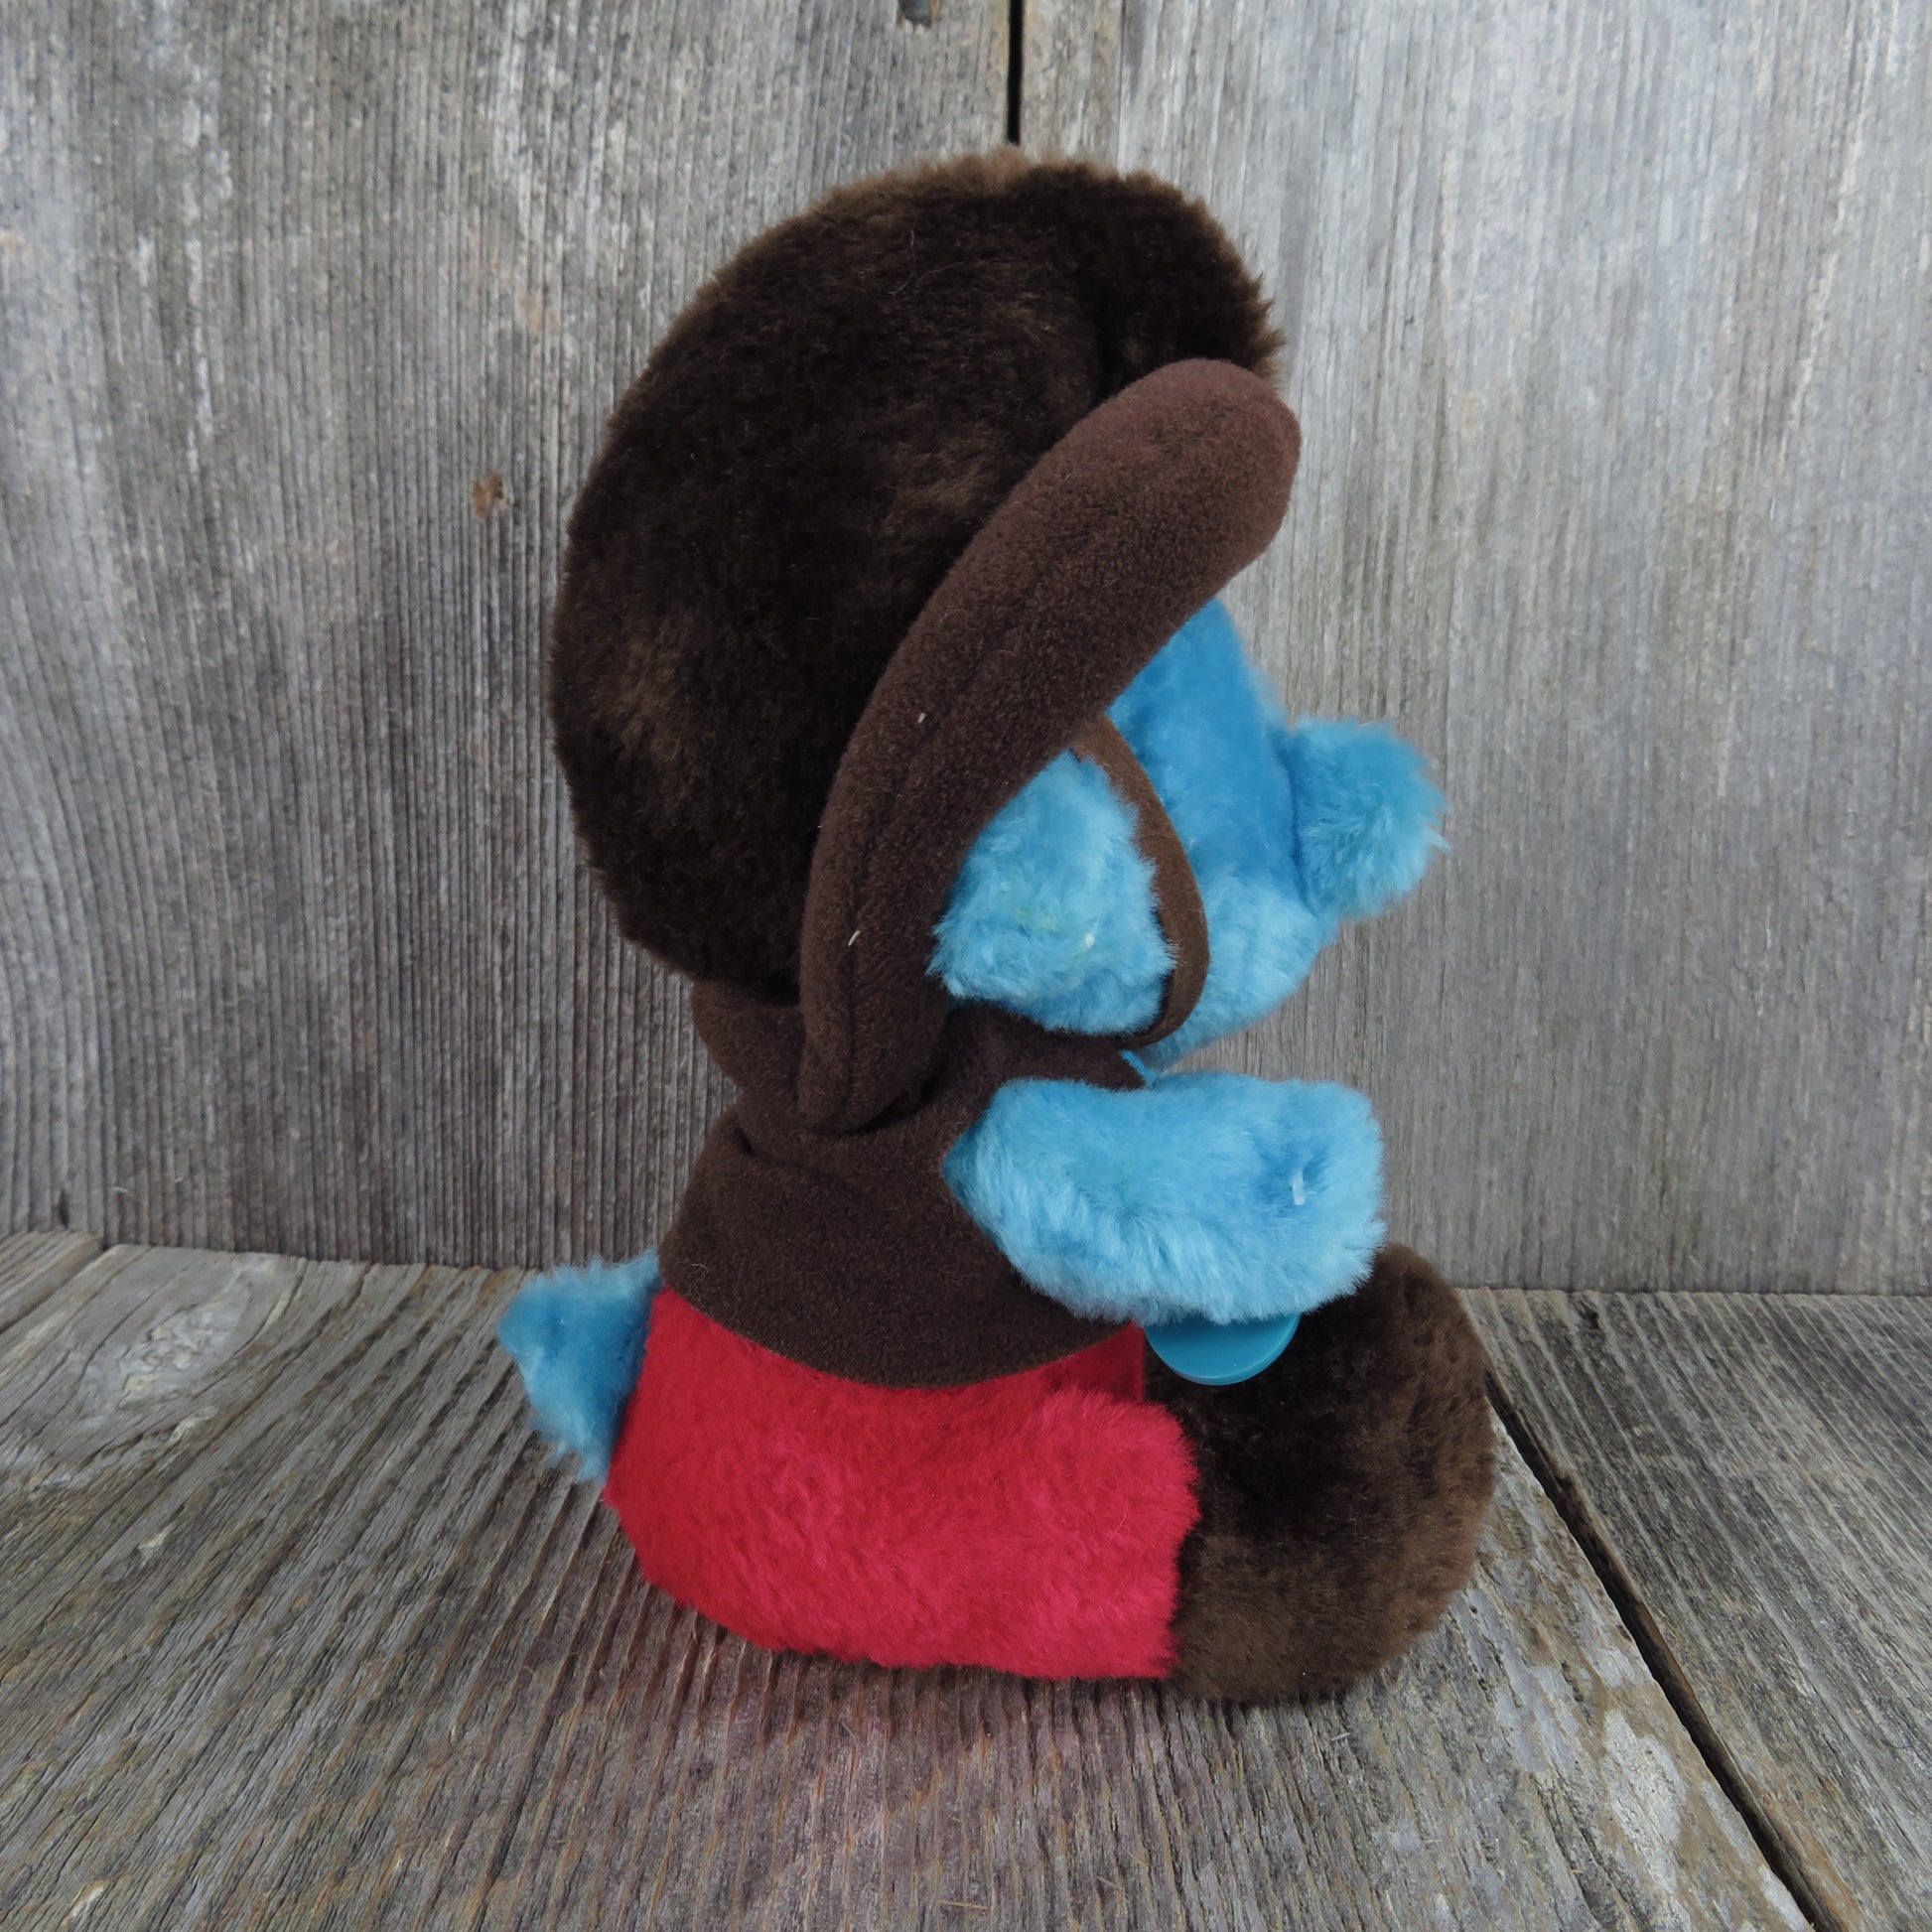 Vintage Cowboy Smurf Plush Wallace Berrie Character Stuffed Animal Blue Red Brown 1983 - At Grandma's Table